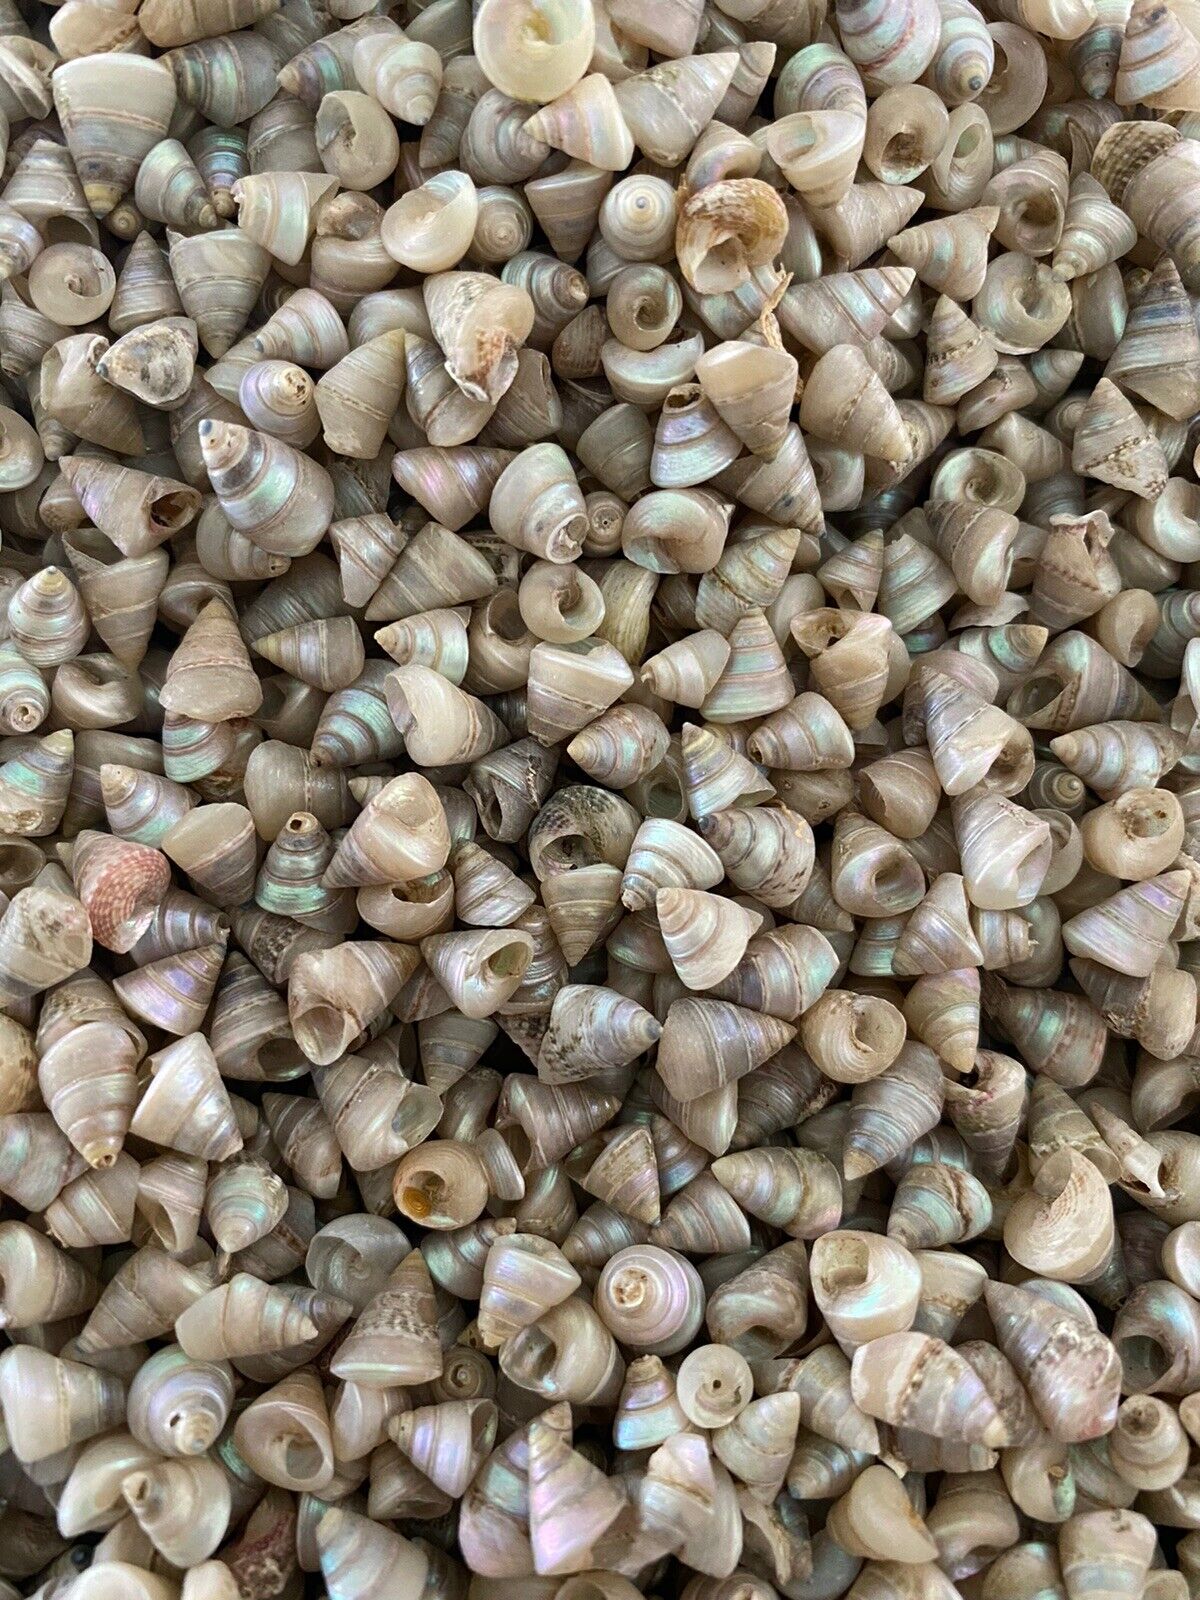 400 PEARLED TINY SEA SHELLS -0.25 And Under - Craft Shell Lot All Natural